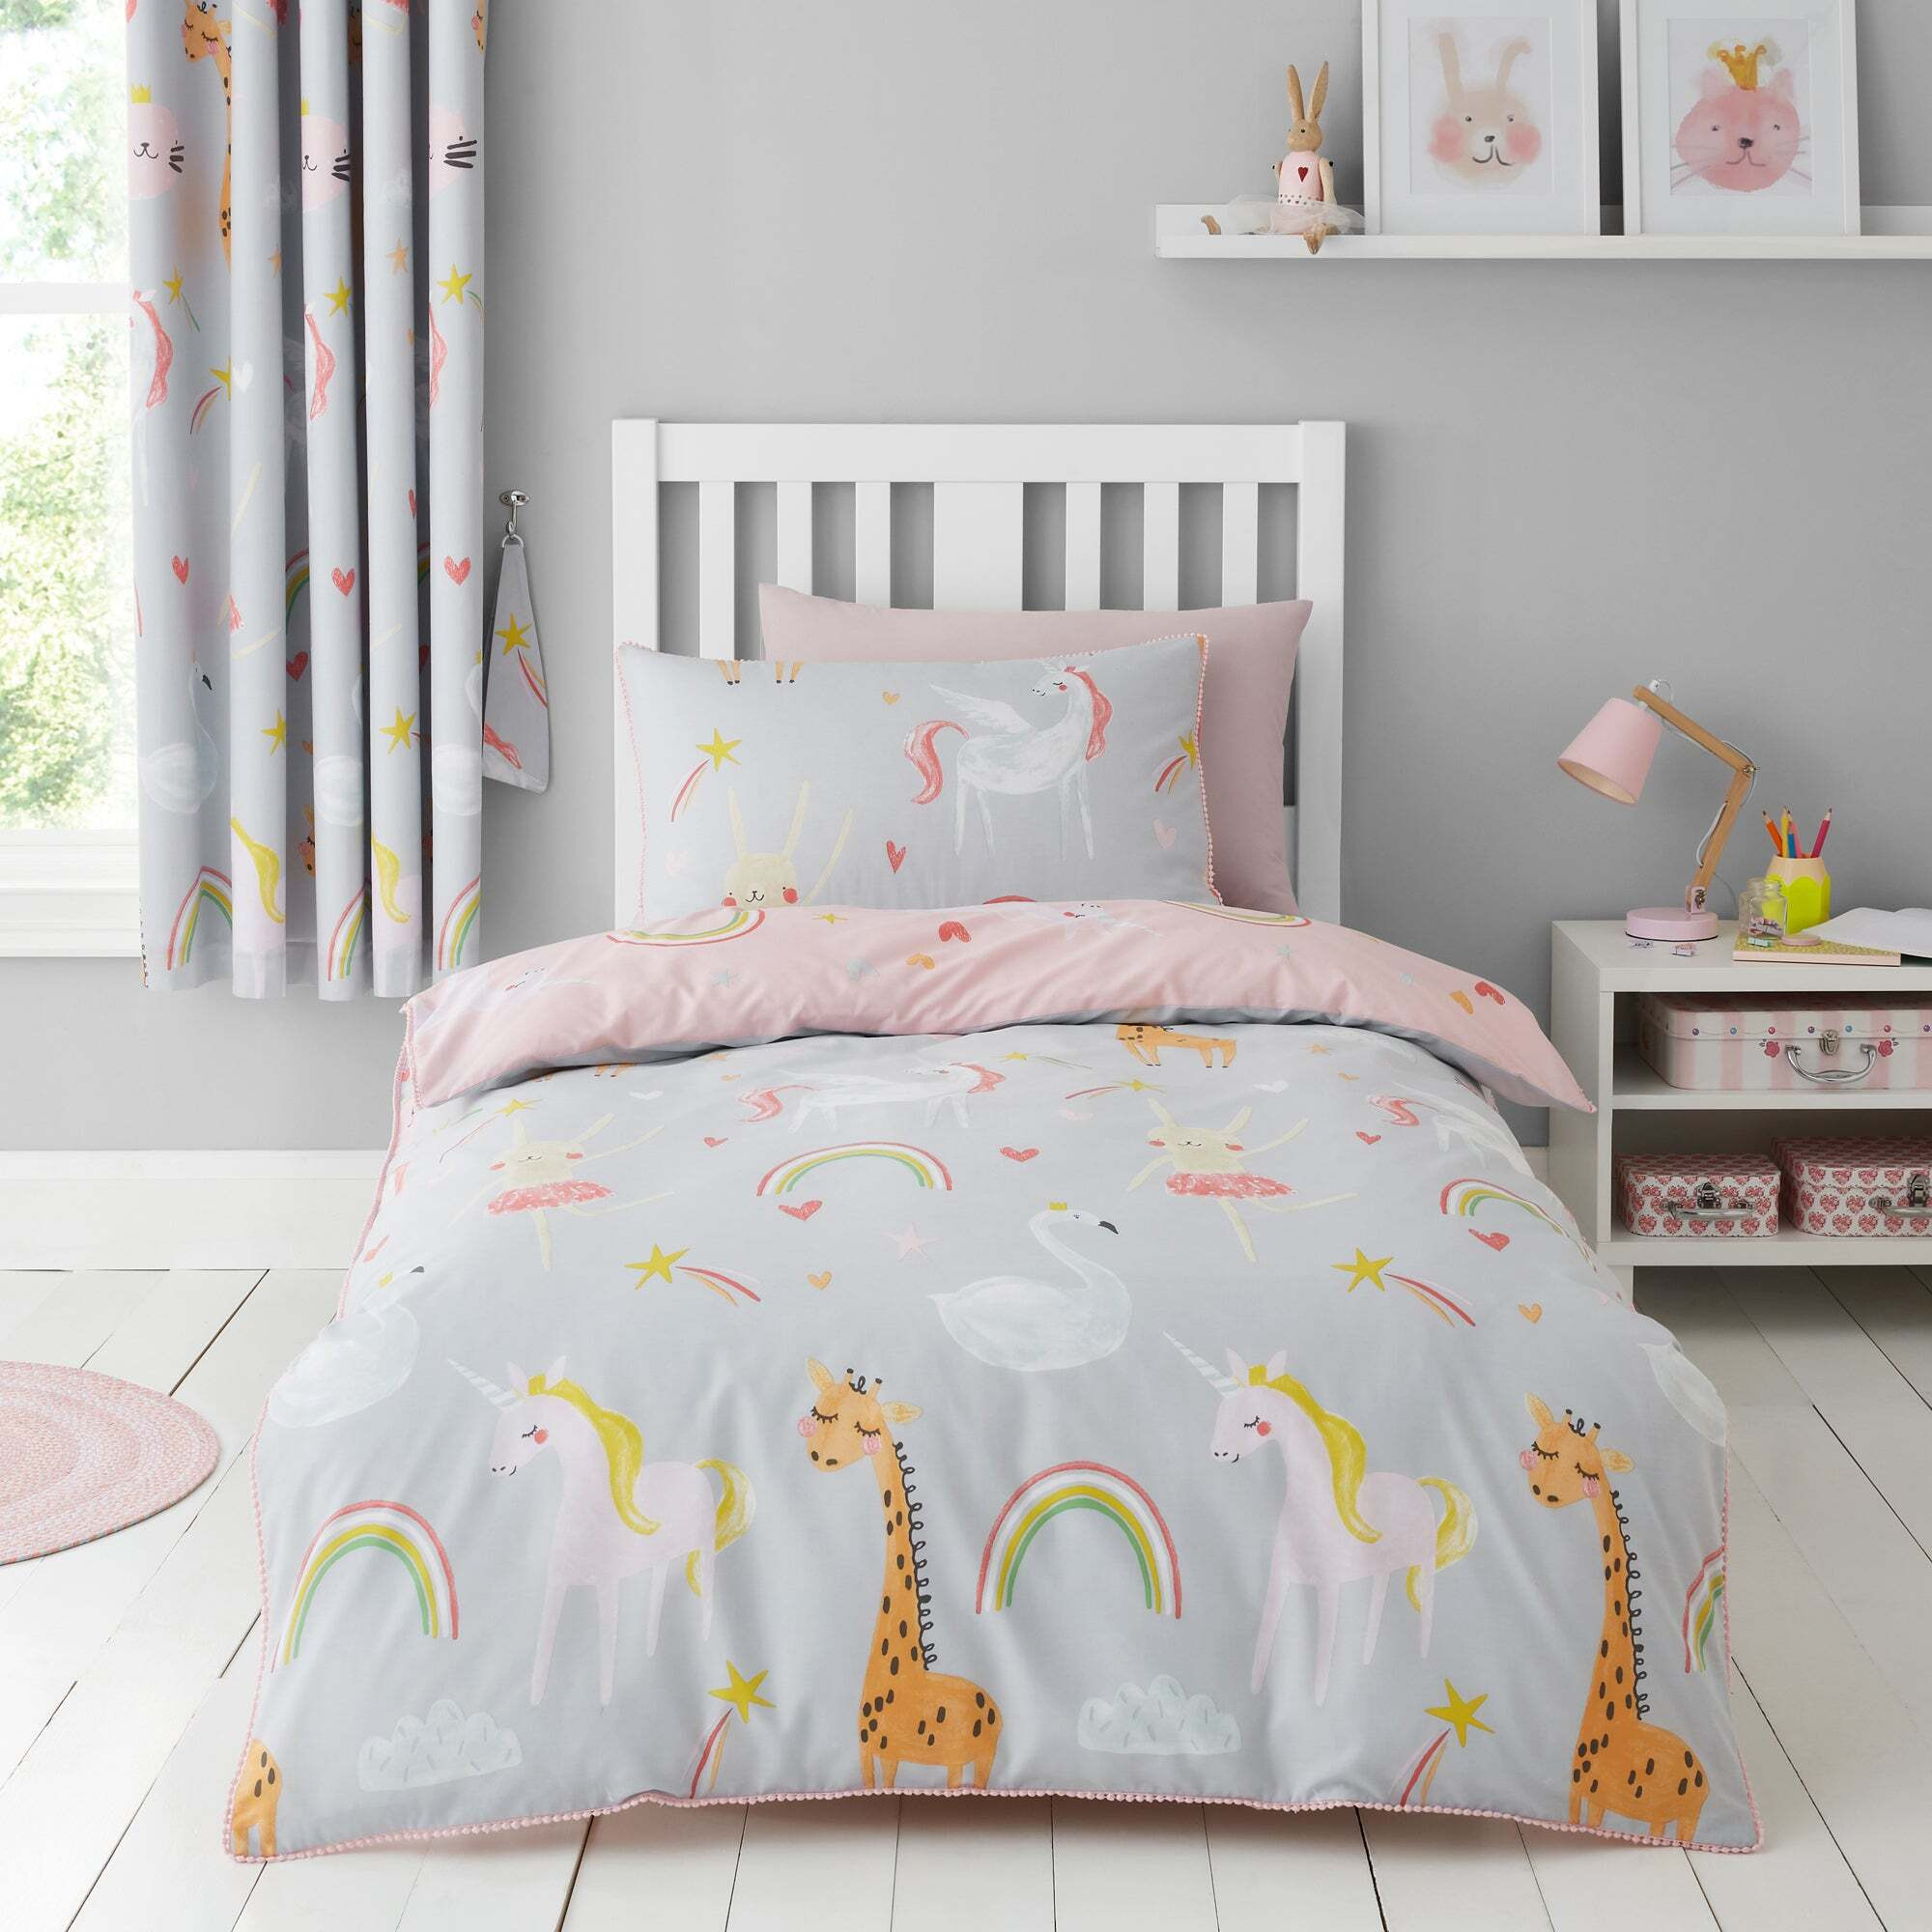 Party Animals Grey Duvet Cover and Pillowcase Set Grey/Pink